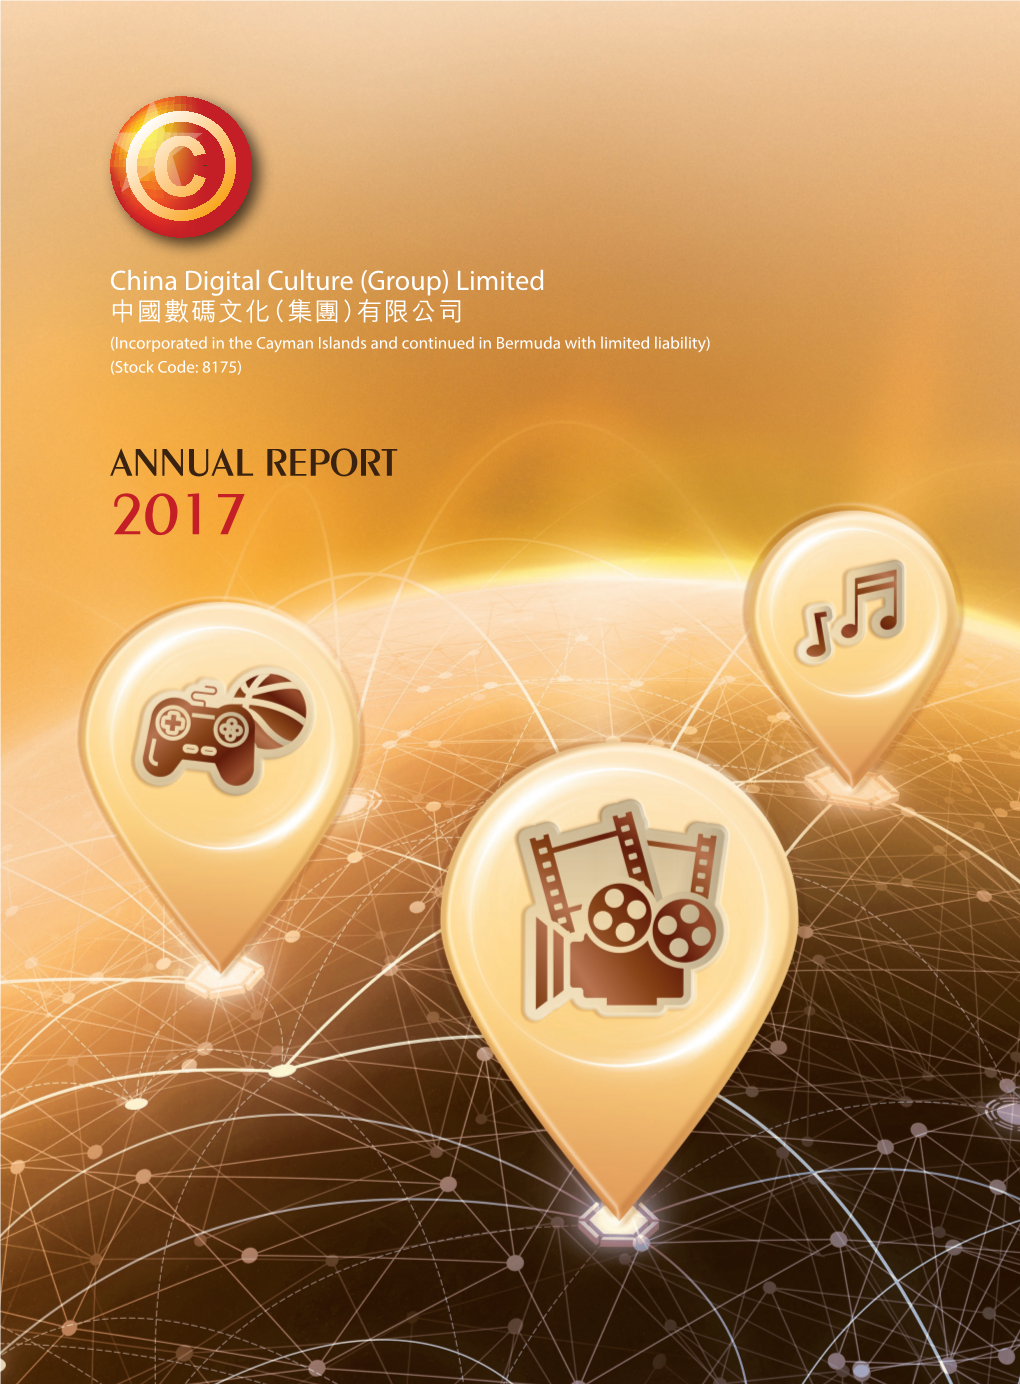 Annual Report 2017 Characteristics of the Gem of the Stock Exchange of Hong Kong Limited (The “Stock Exchange”)